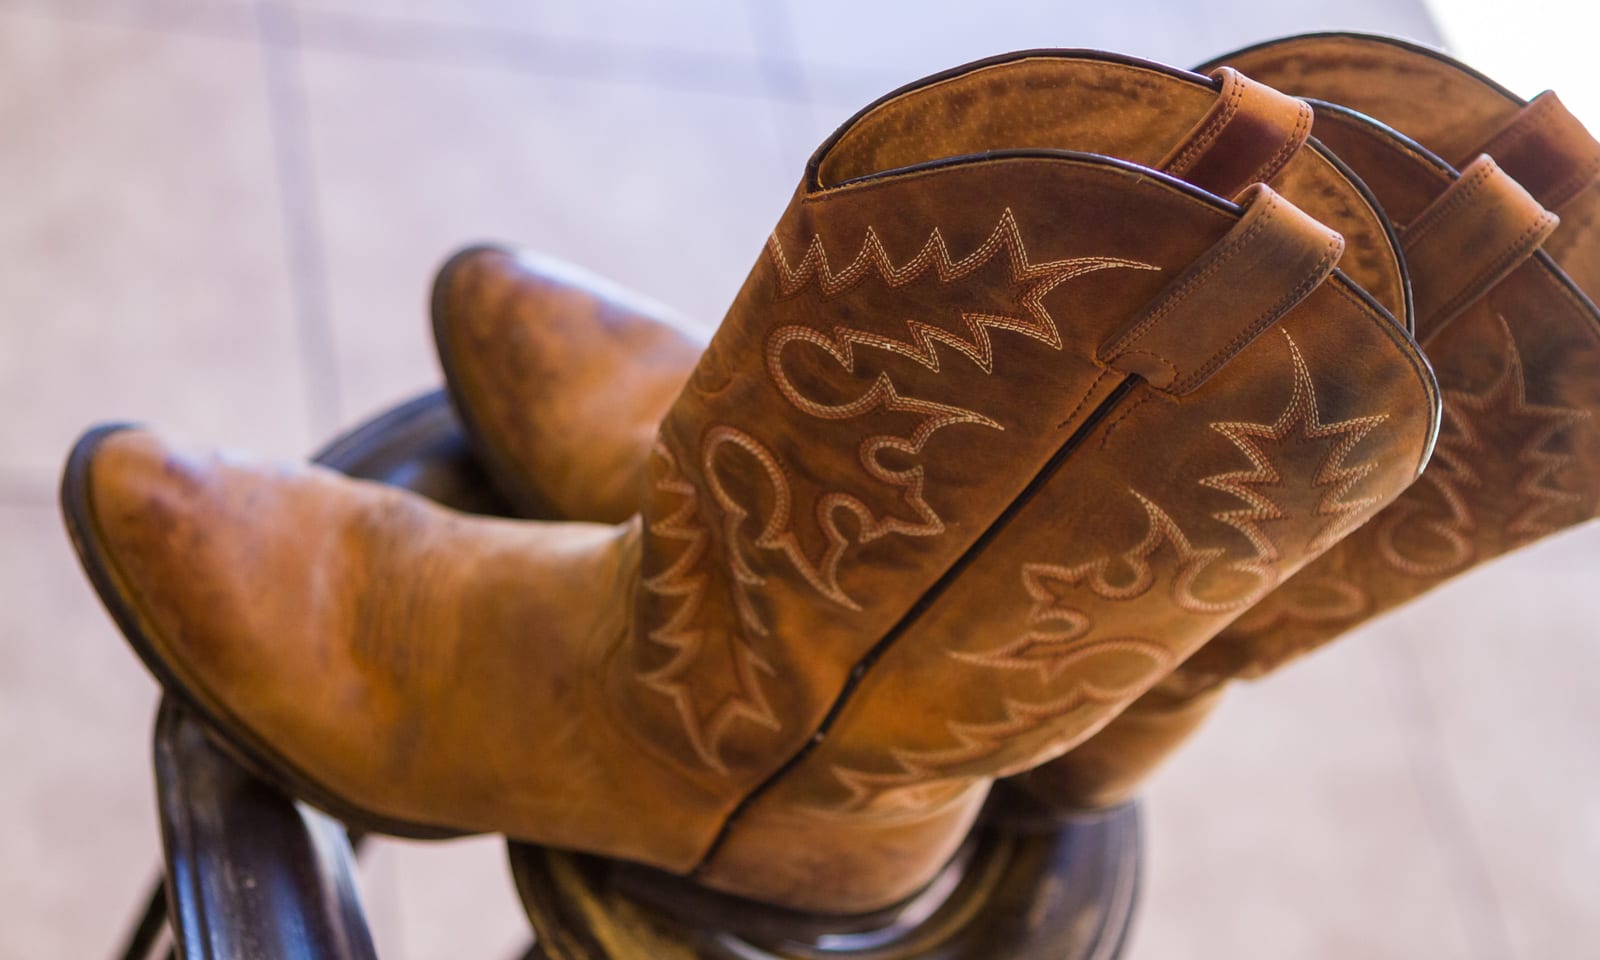 affordable cowboy boots